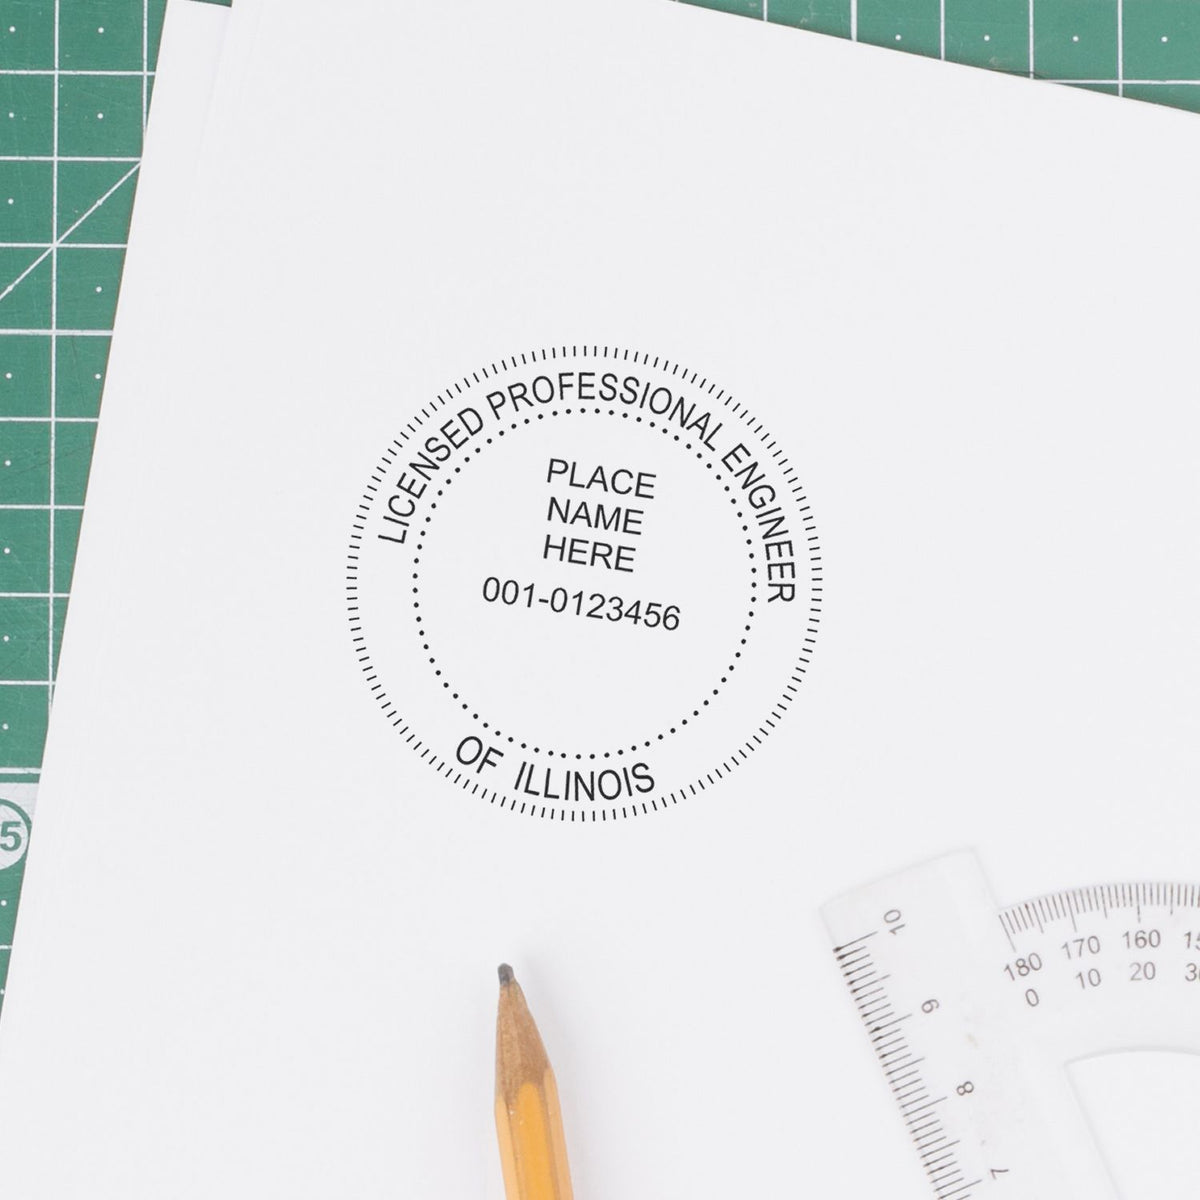 Another Example of a stamped impression of the Premium MaxLight Pre-Inked Illinois Engineering Stamp on a piece of office paper.